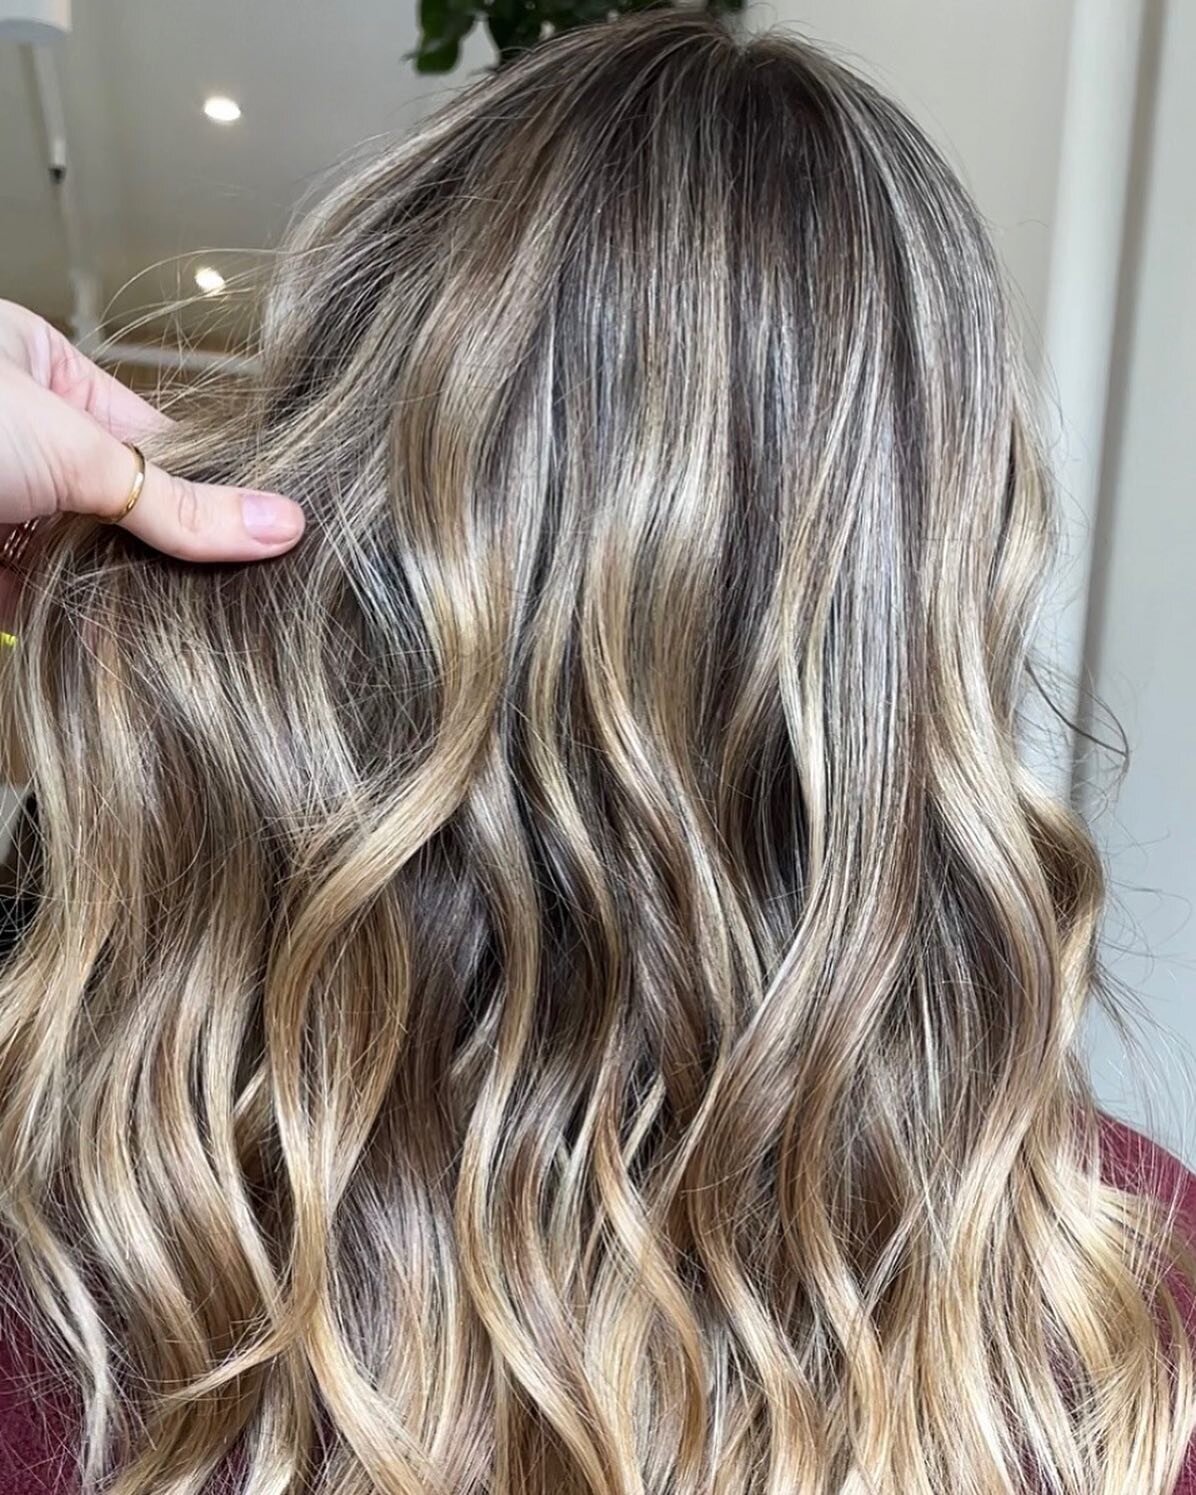 A little warmth for your feed this Thursday thanks to @itsgoldjen 🌤️✨

#staygold #kalamazoohairstylist #kalamazoosalon #portagehairstylist #discoverkzoo #wmu #redkenshadeseq #goldwell #randco